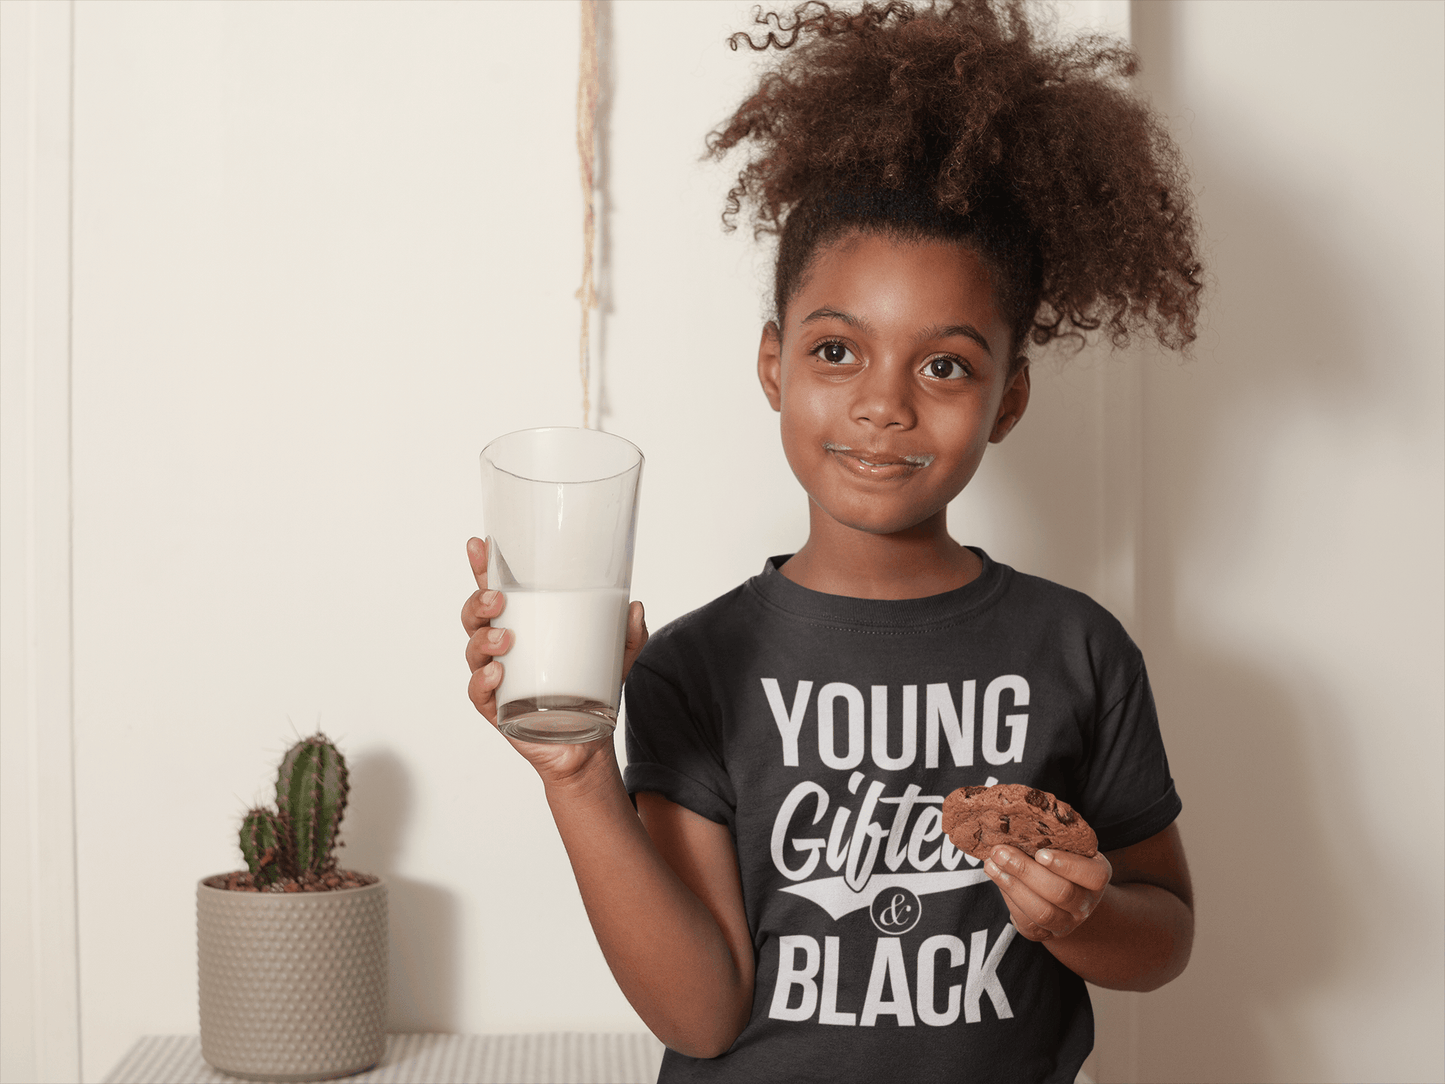 Young Gifted & Black Toddler Short Sleeve Tee - Chocolate Ancestor